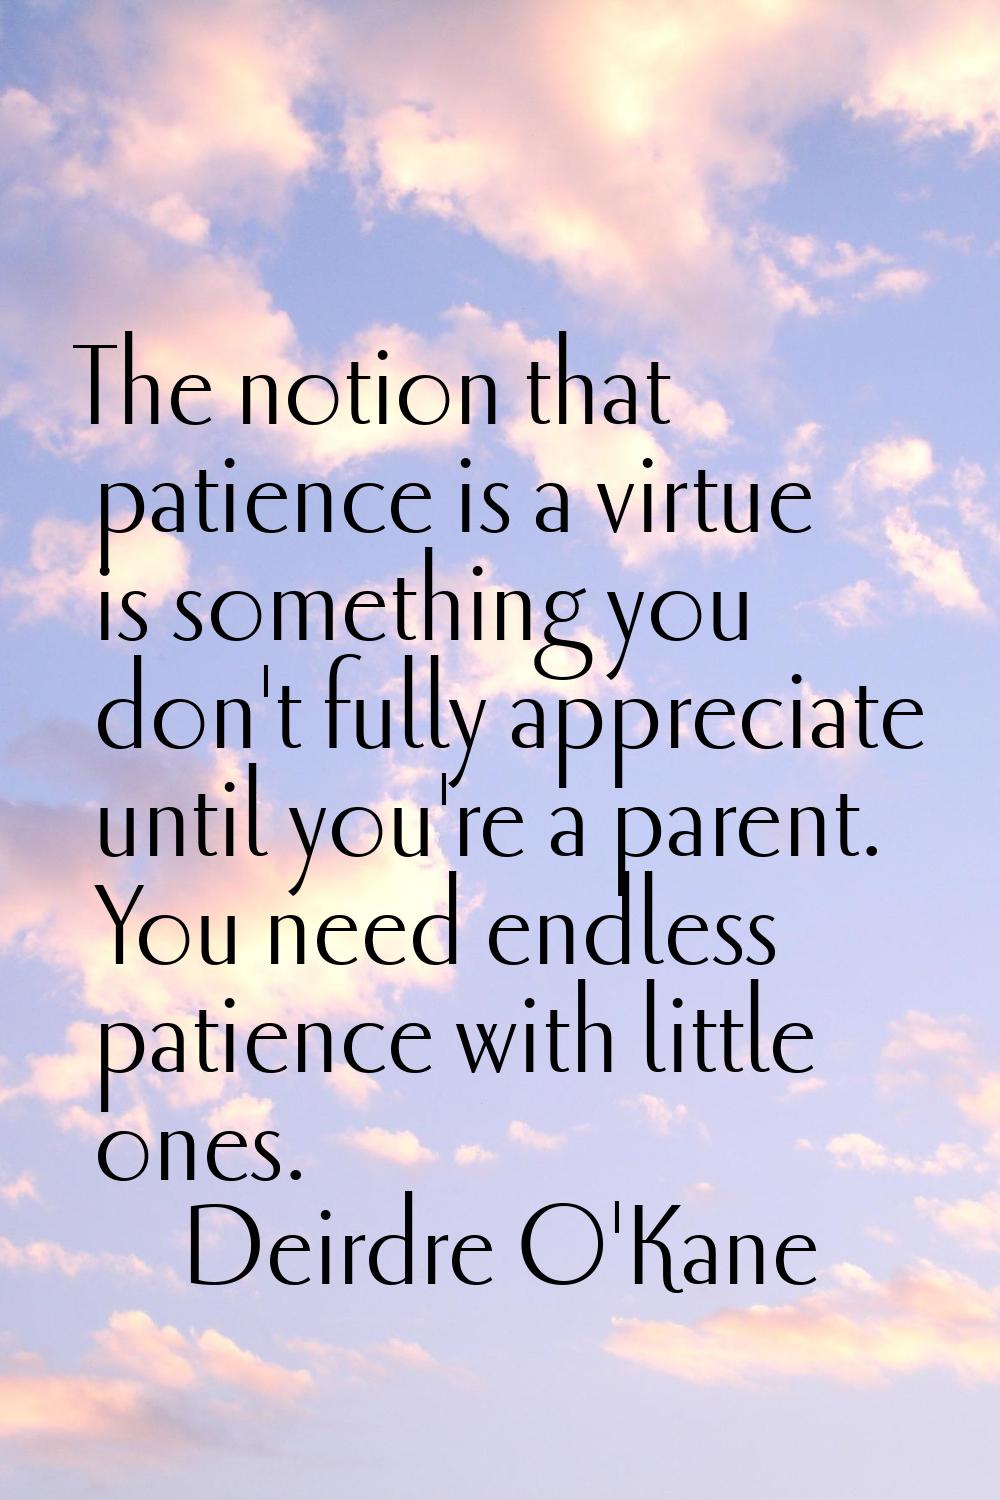 The notion that patience is a virtue is something you don't fully appreciate until you're a parent.